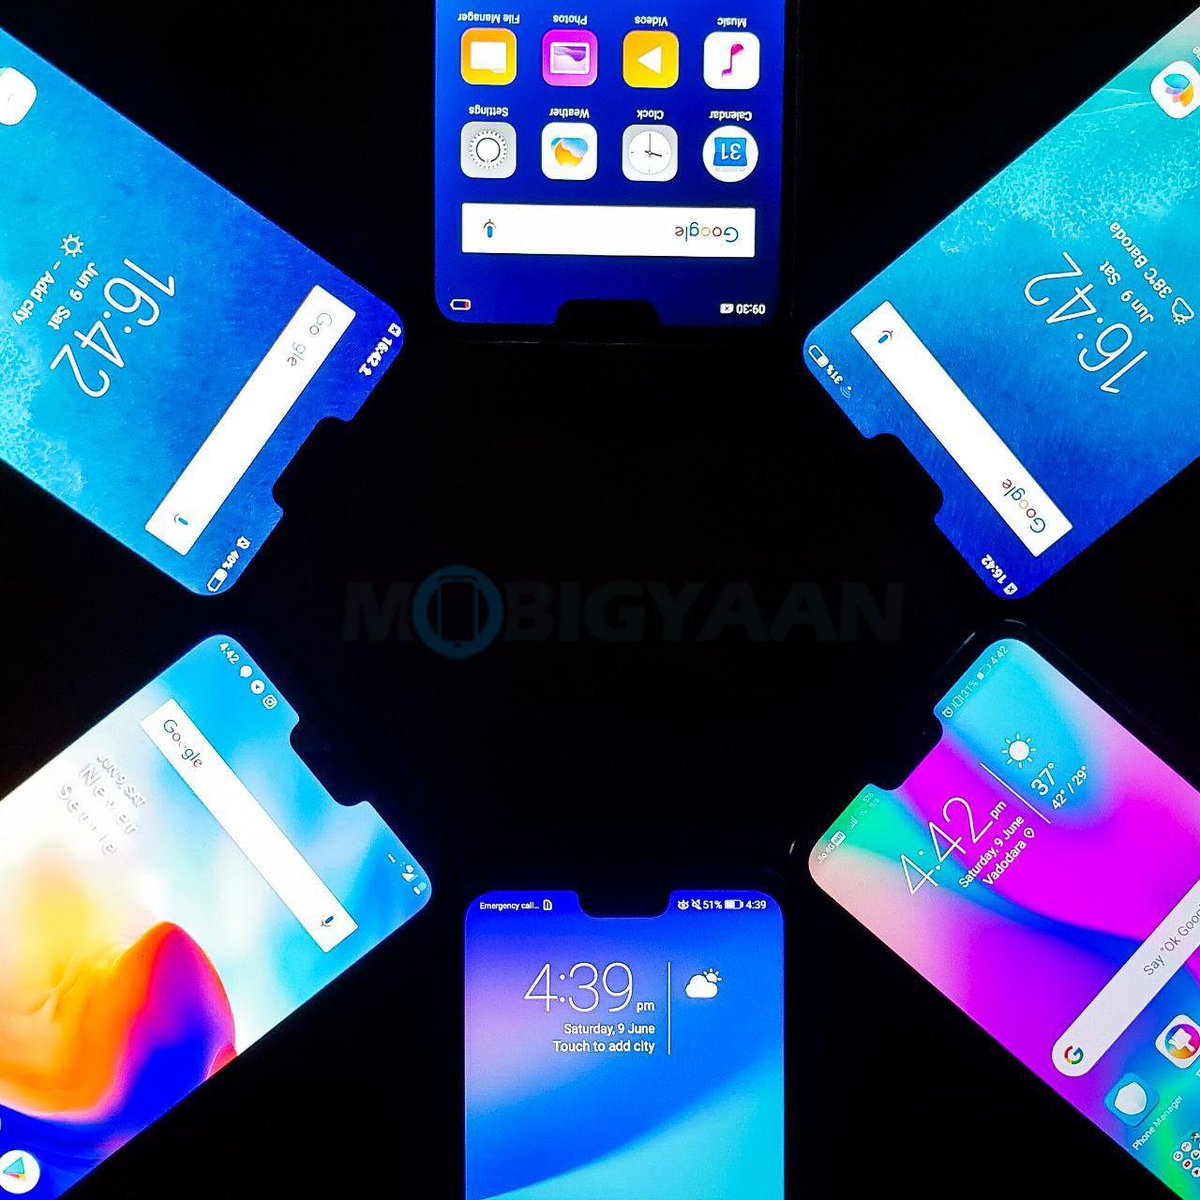 6 #Android Smartphones that landed in @MobiGyaan's office. Which one do you like?

#Notch #latestphones
#huaweip20lite #honor10 #oppof7 #oneplus6 #vivox21 #vivov9 #vivo #oppo #huawei  #honor